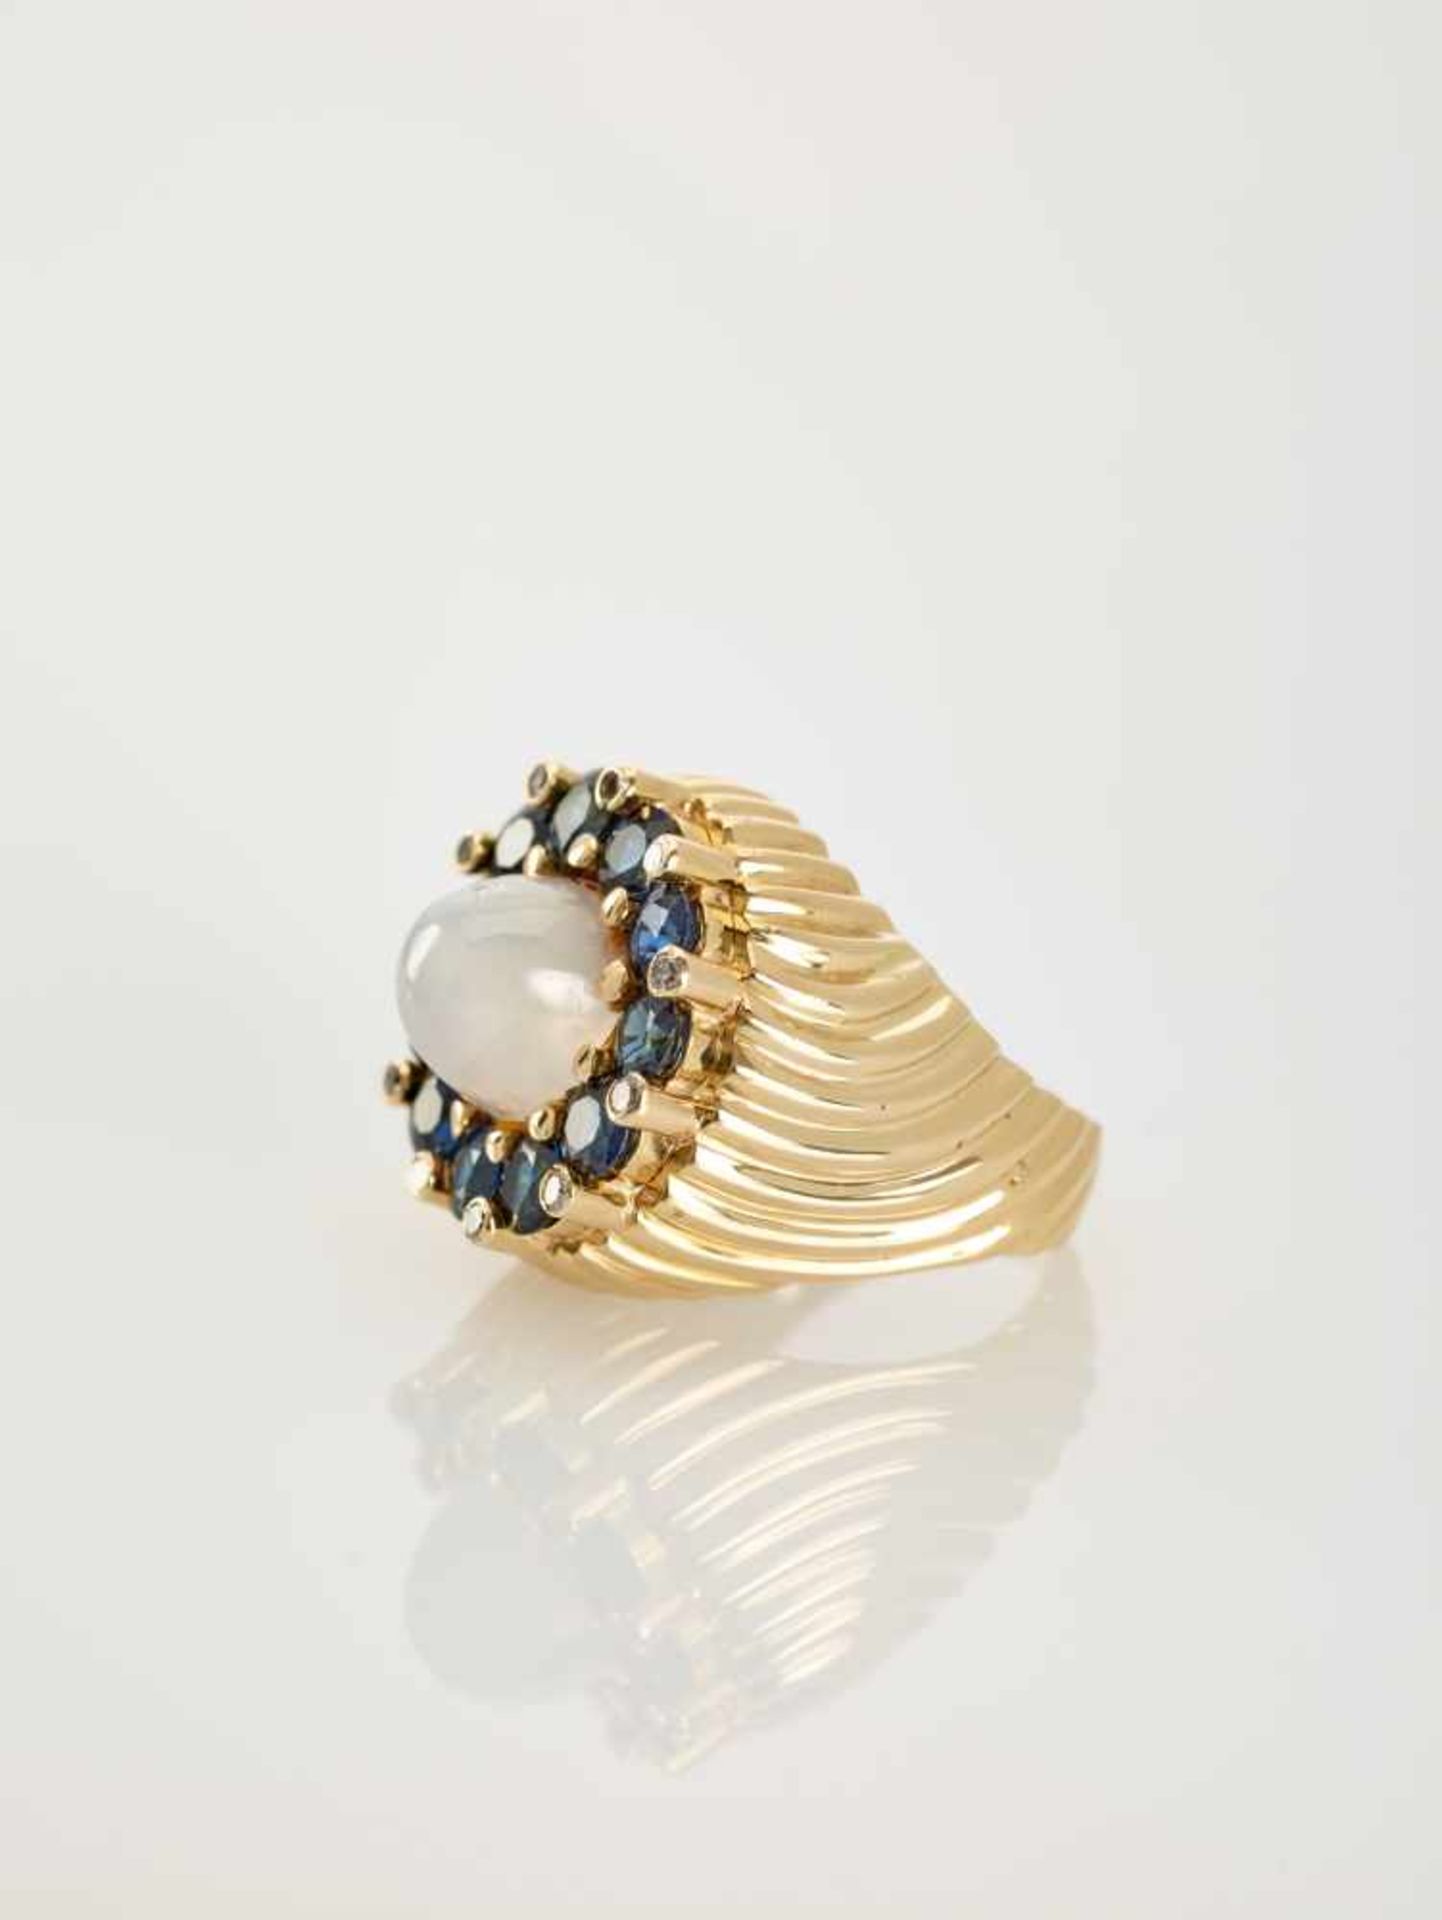 A SAPPHIRE, DIAMOND AND MOONSTONE YELLOW GOLD COCKTAIL RING BY PALTSCHOAustriaErwin Paltscho,